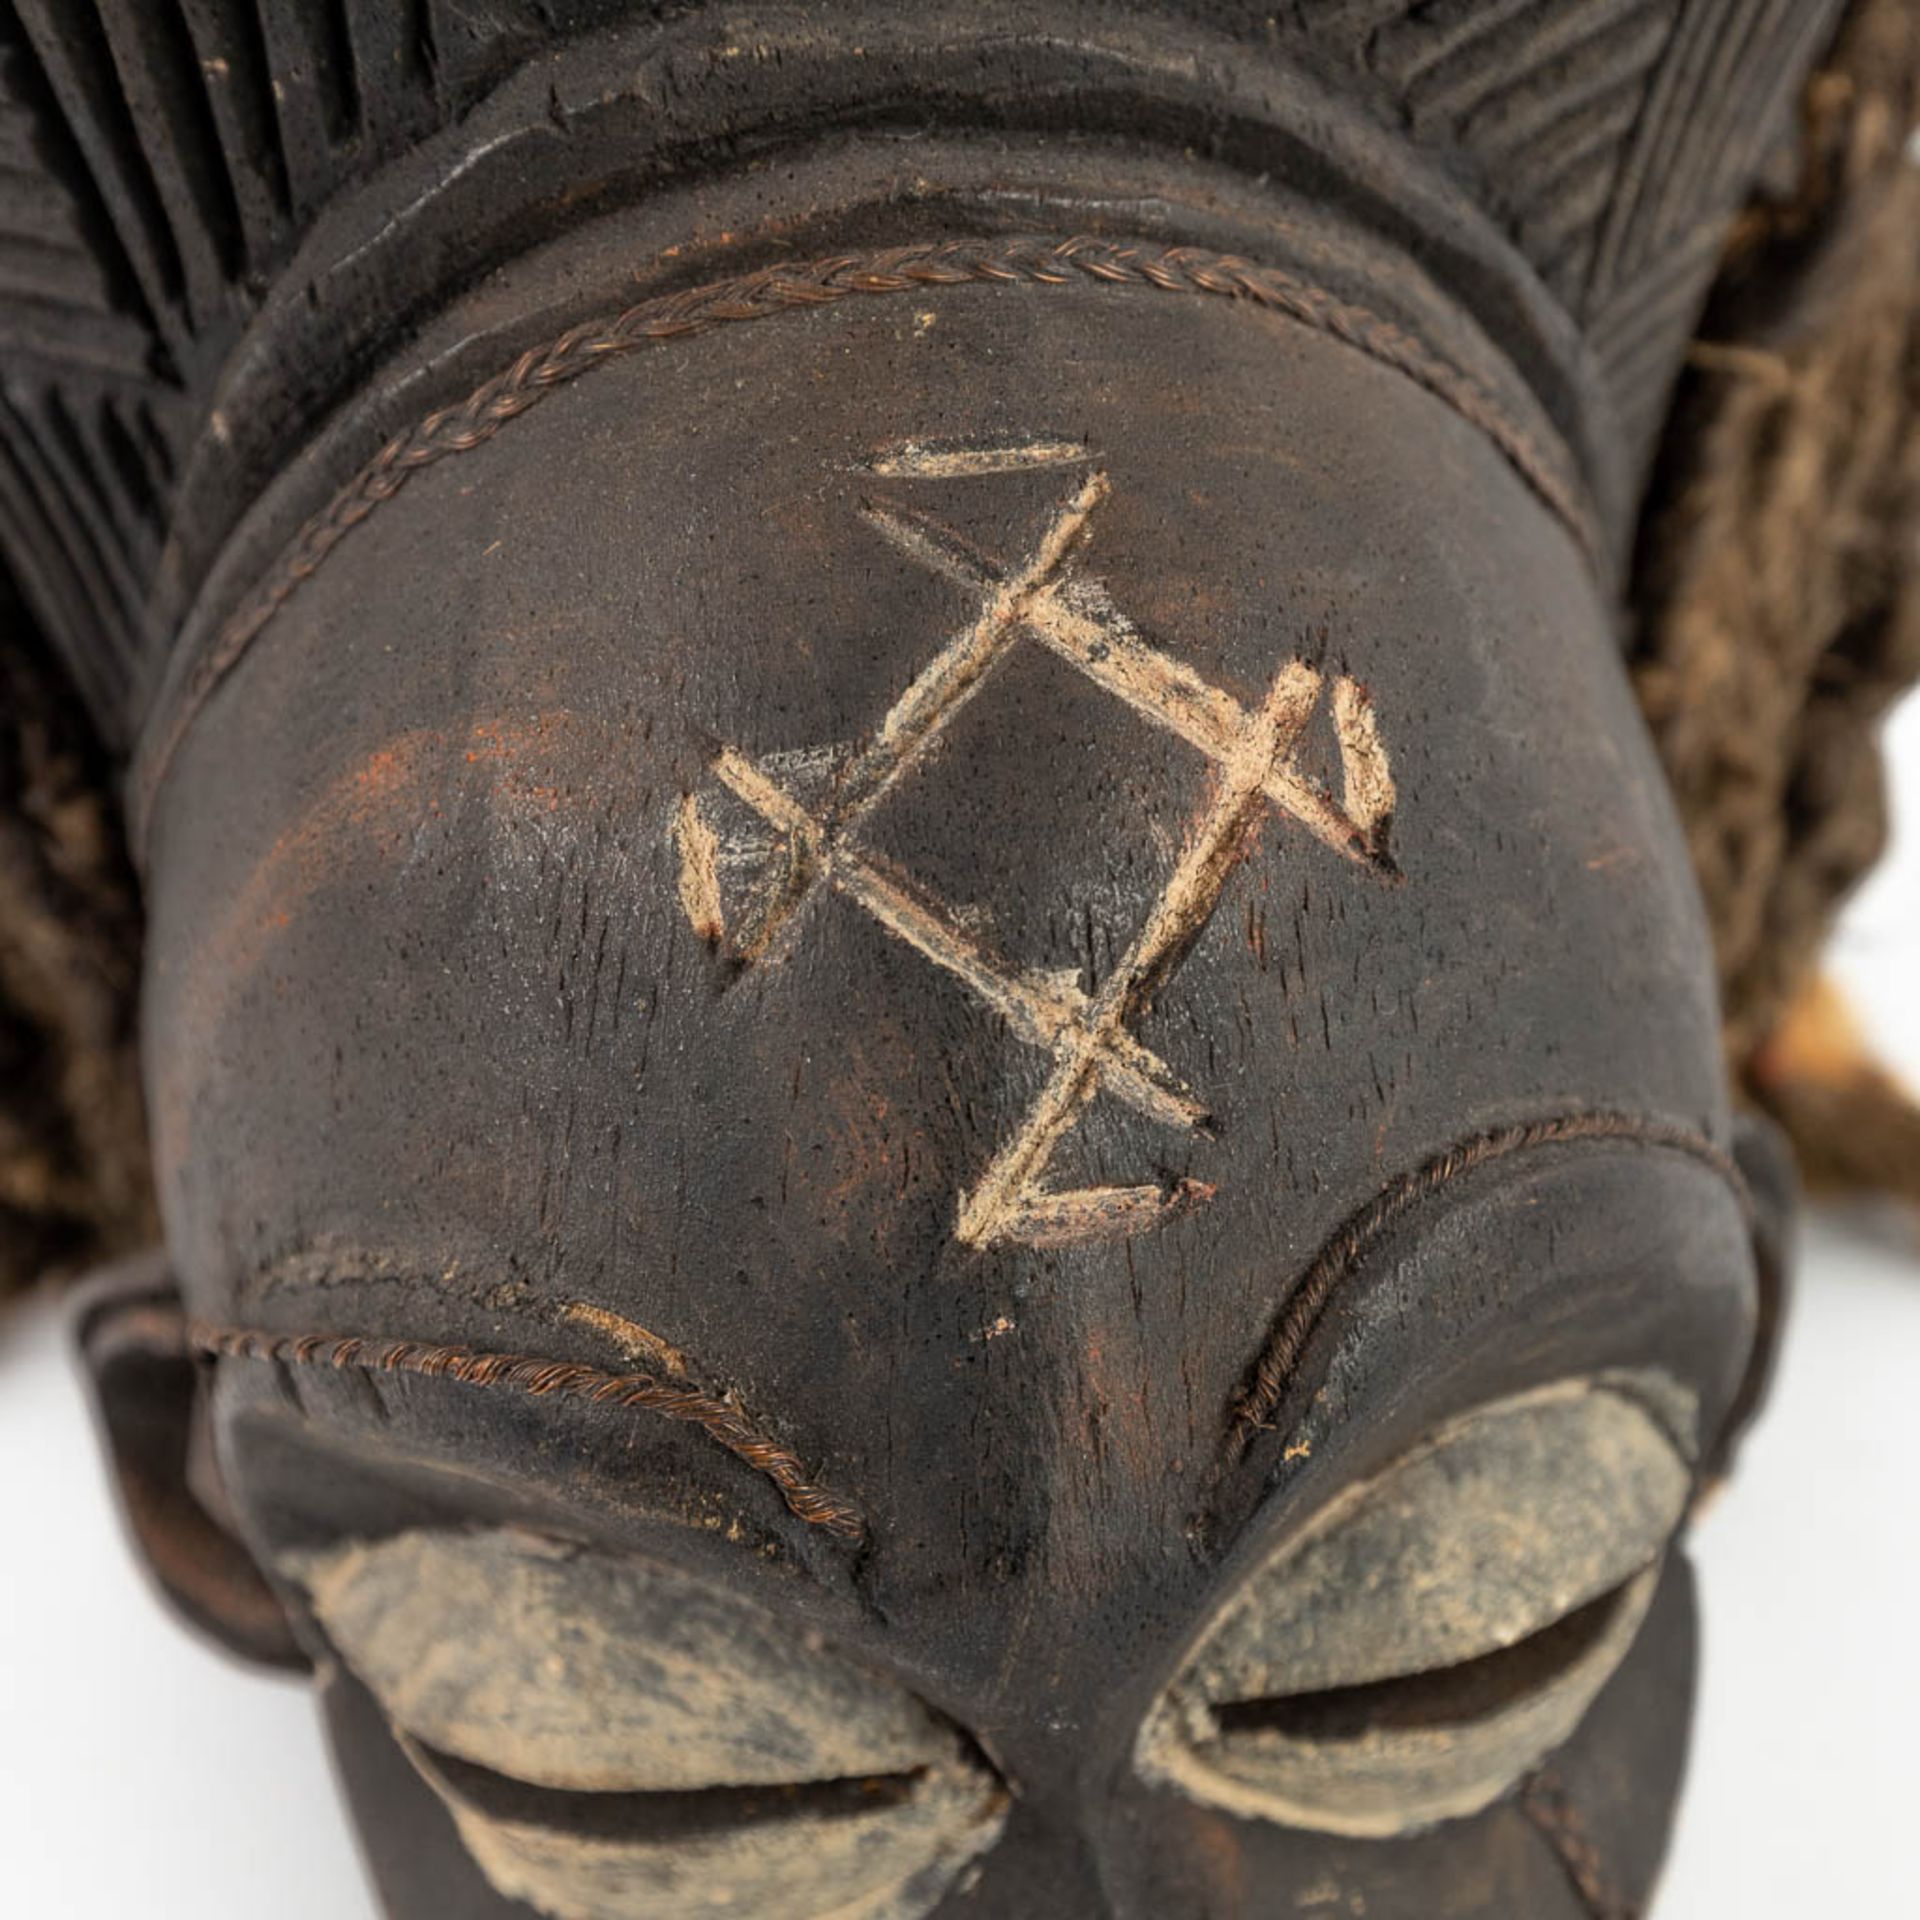 A collection of 2 African masks 'Chokwe' and 'Luba Songye'. (L: 13 x W: 24 x H: 43 cm) - Image 19 of 21